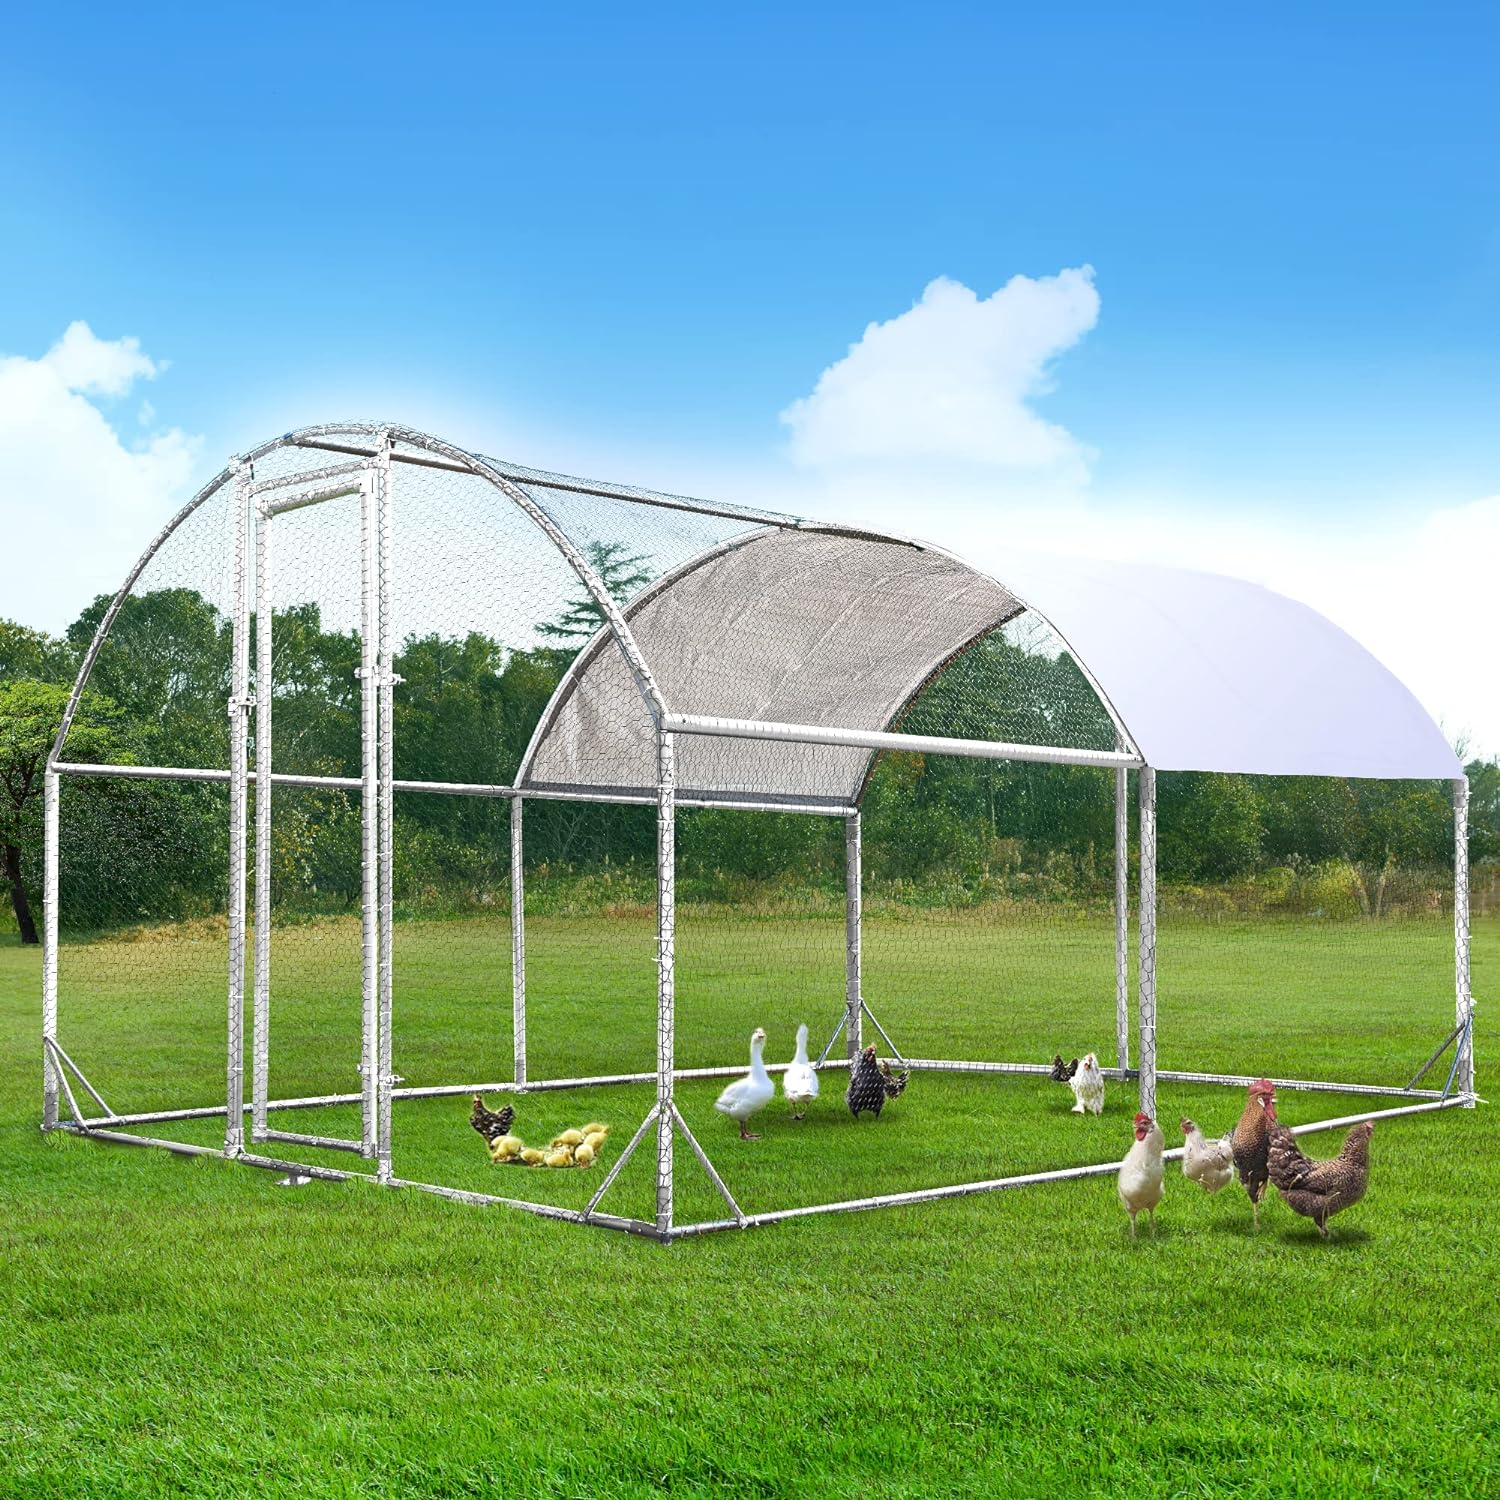 HABUTWAY Large Metal Chicken Coop,Galvanized Walk-in Poultry,Chicken Run with Waterproof and Anti-Ultraviolet Cover,Dome Shaped Metal Coop add Steel Frames for Extra Stability 12.5'L*9.2'W*6.5'H